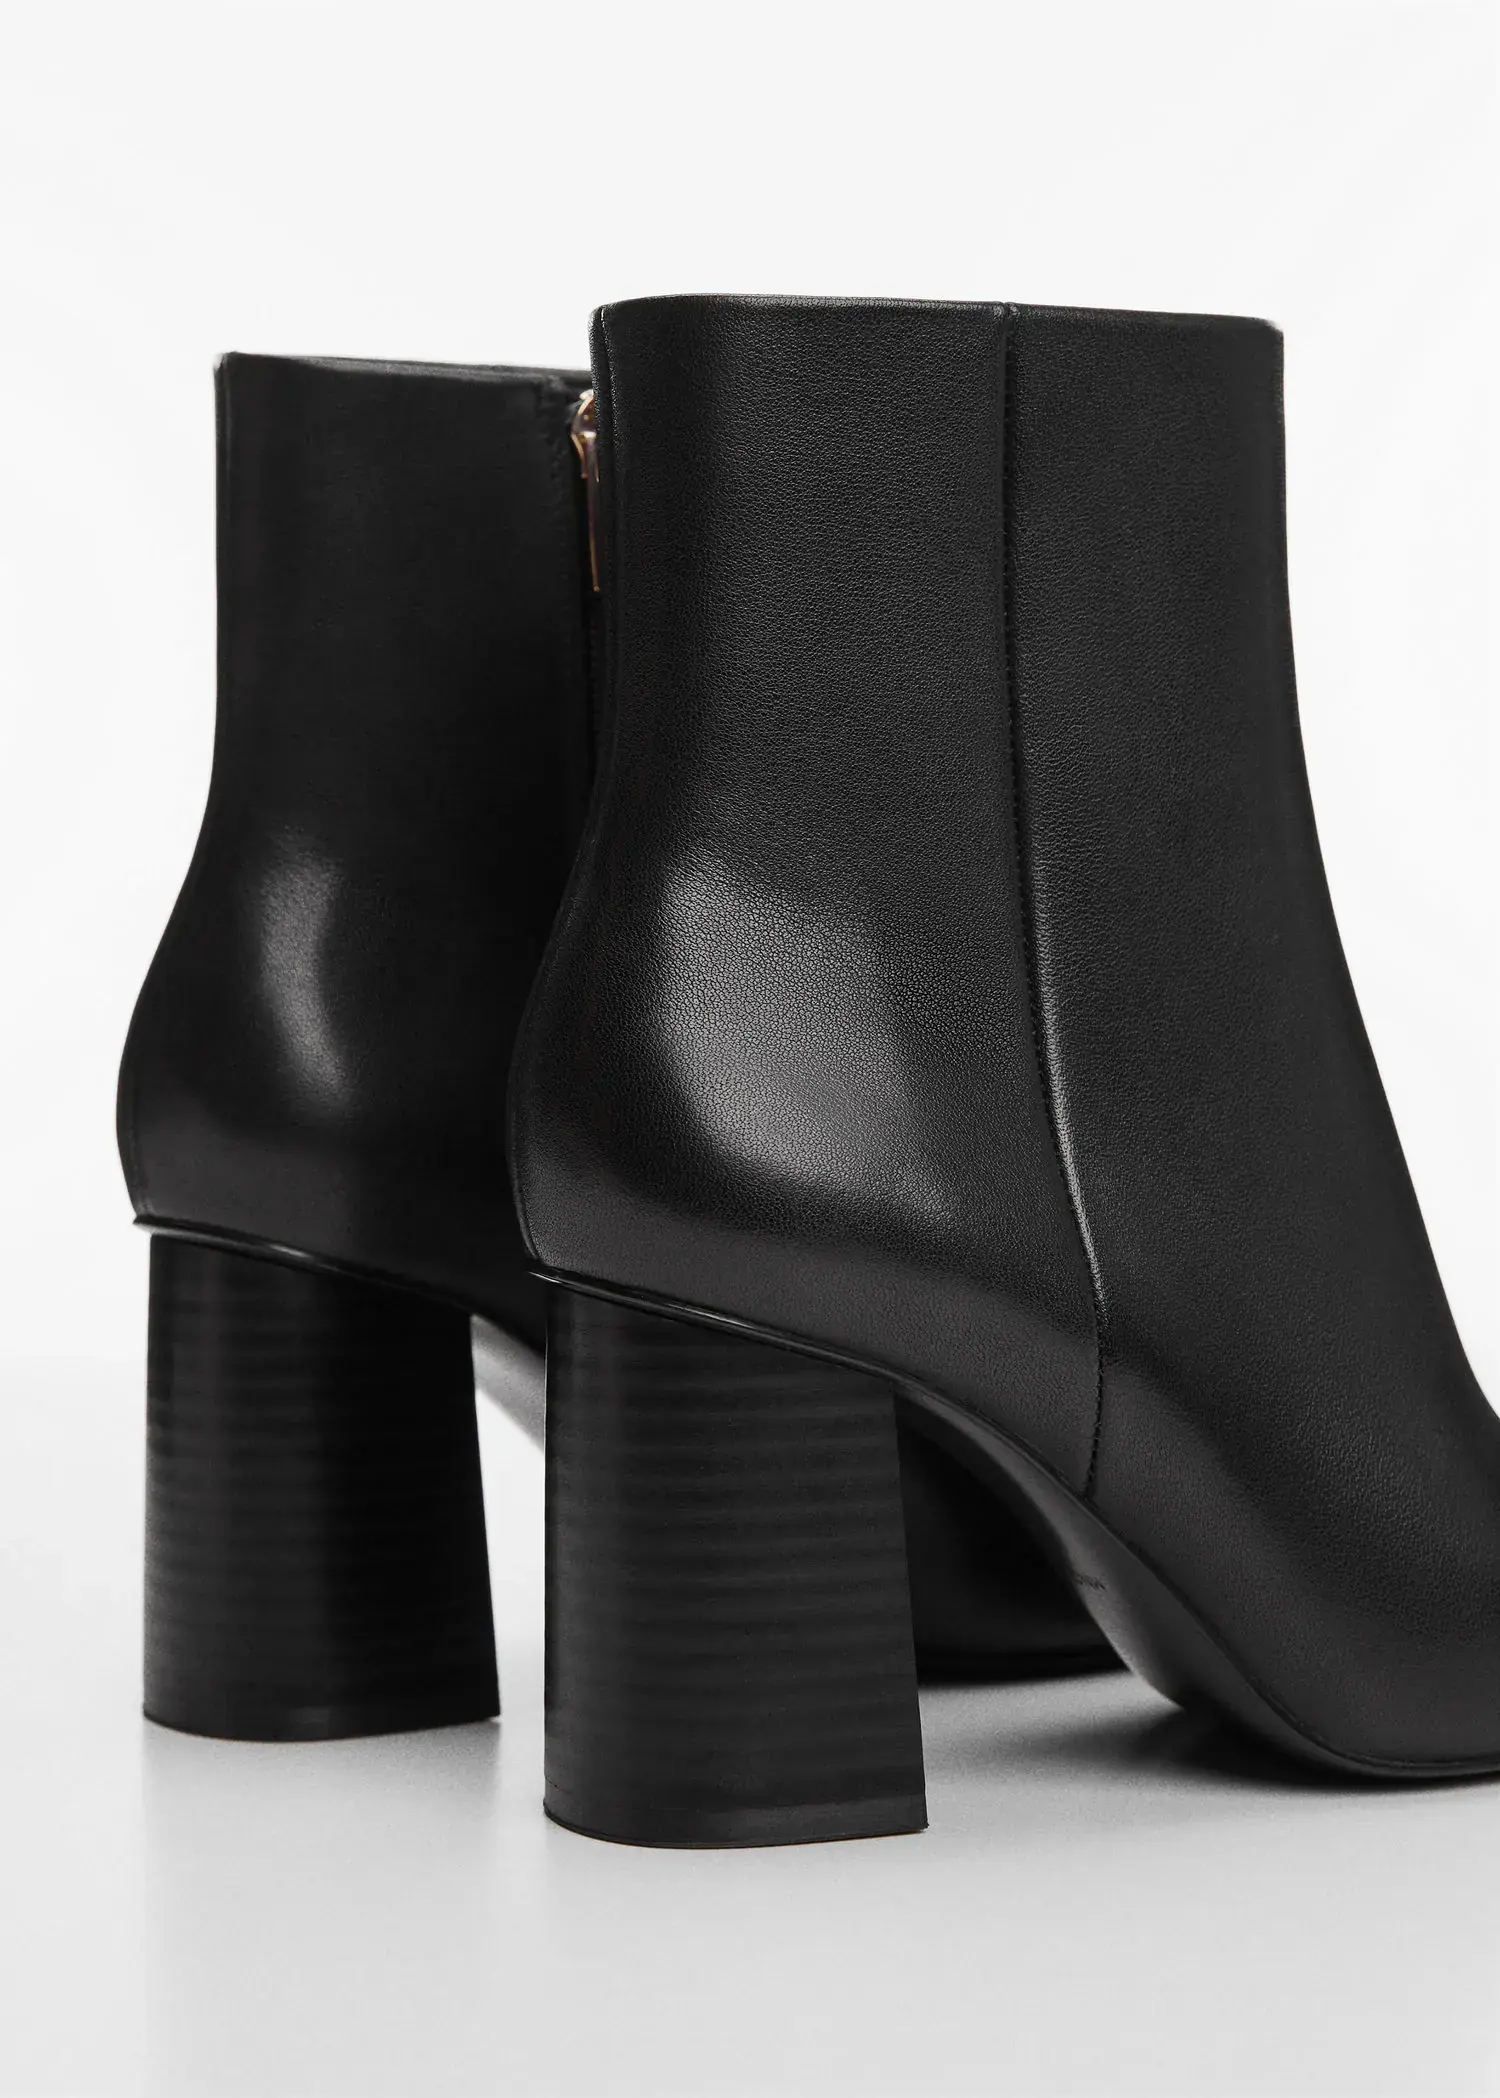 Mango Squared toe leather ankle boots. 3